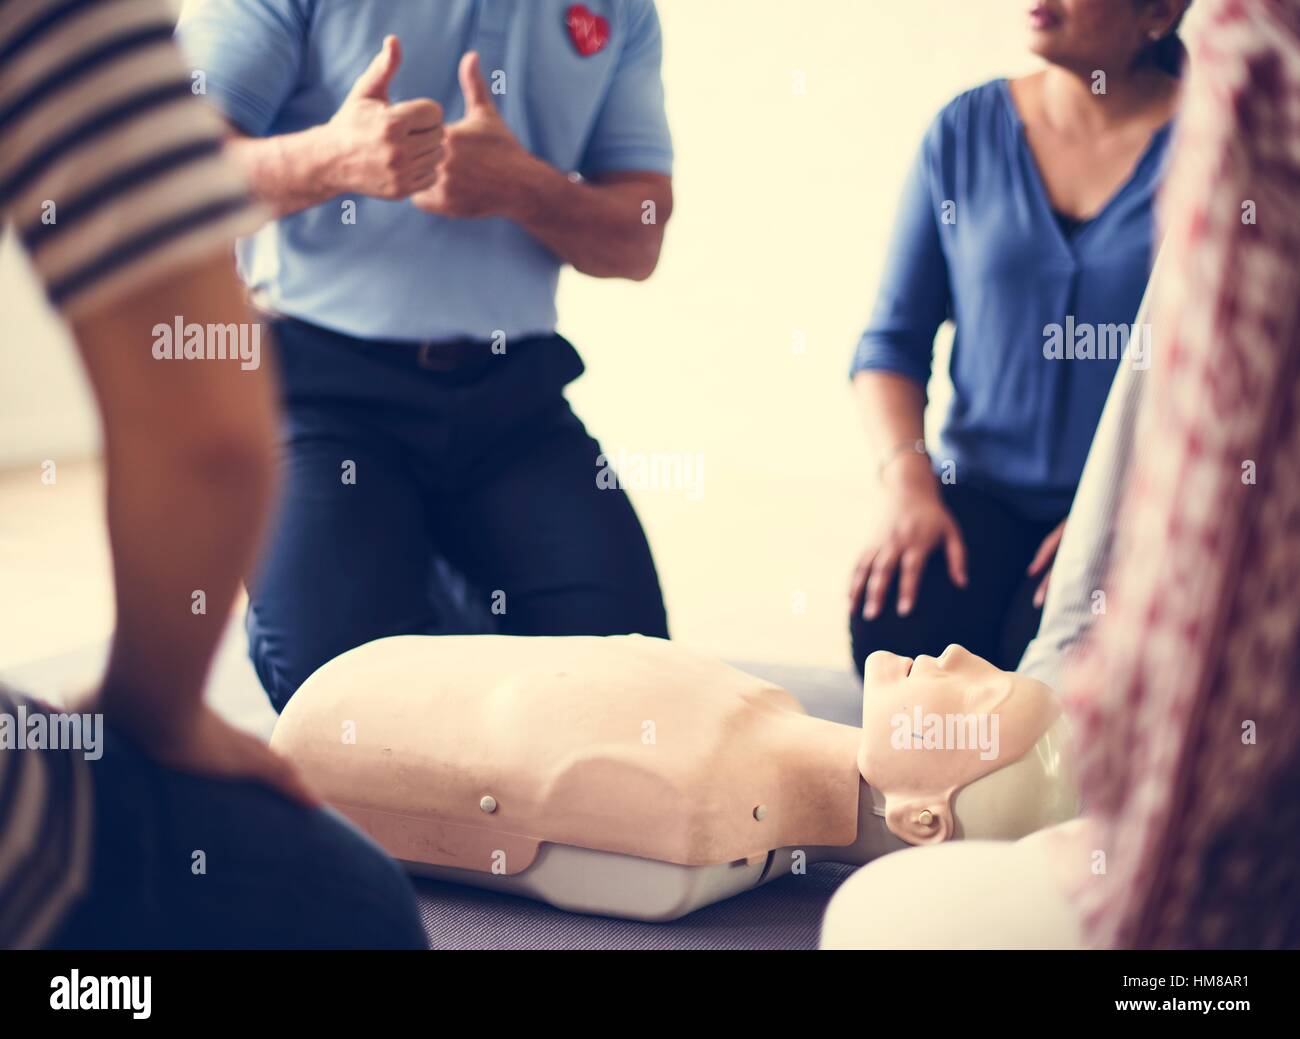 CPR First Aid Training Concept Stock Photo